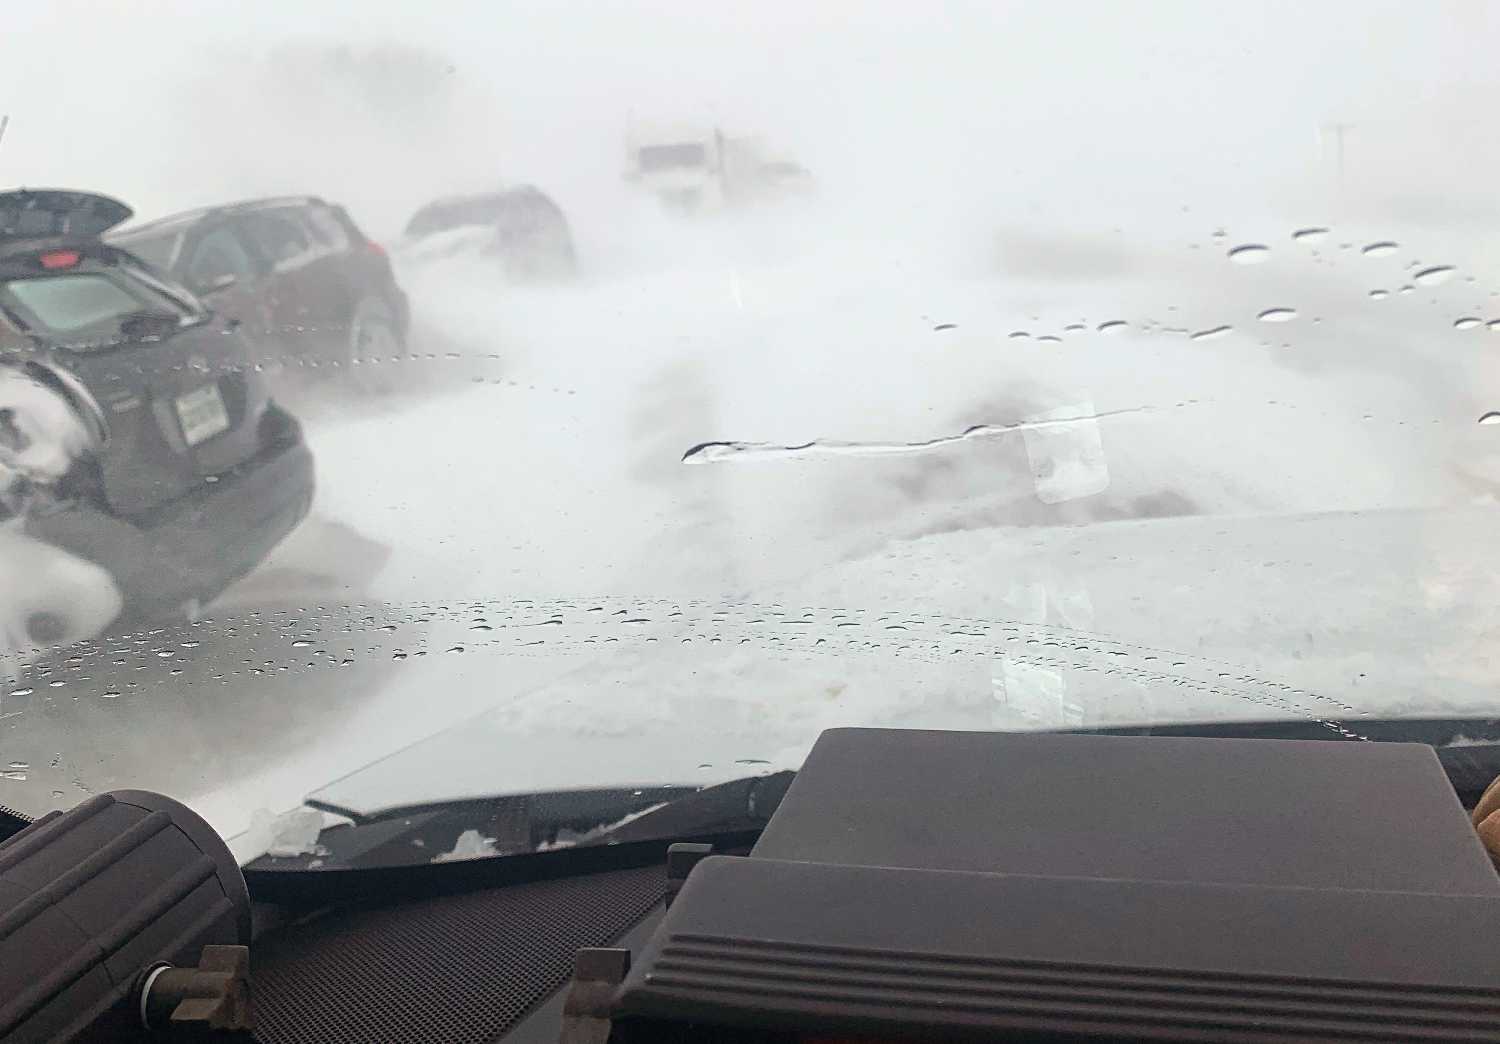 The view from an RCMP vehicle as hundreds of vehicles were stuck in a blizzard on the Trans-Canada Highway